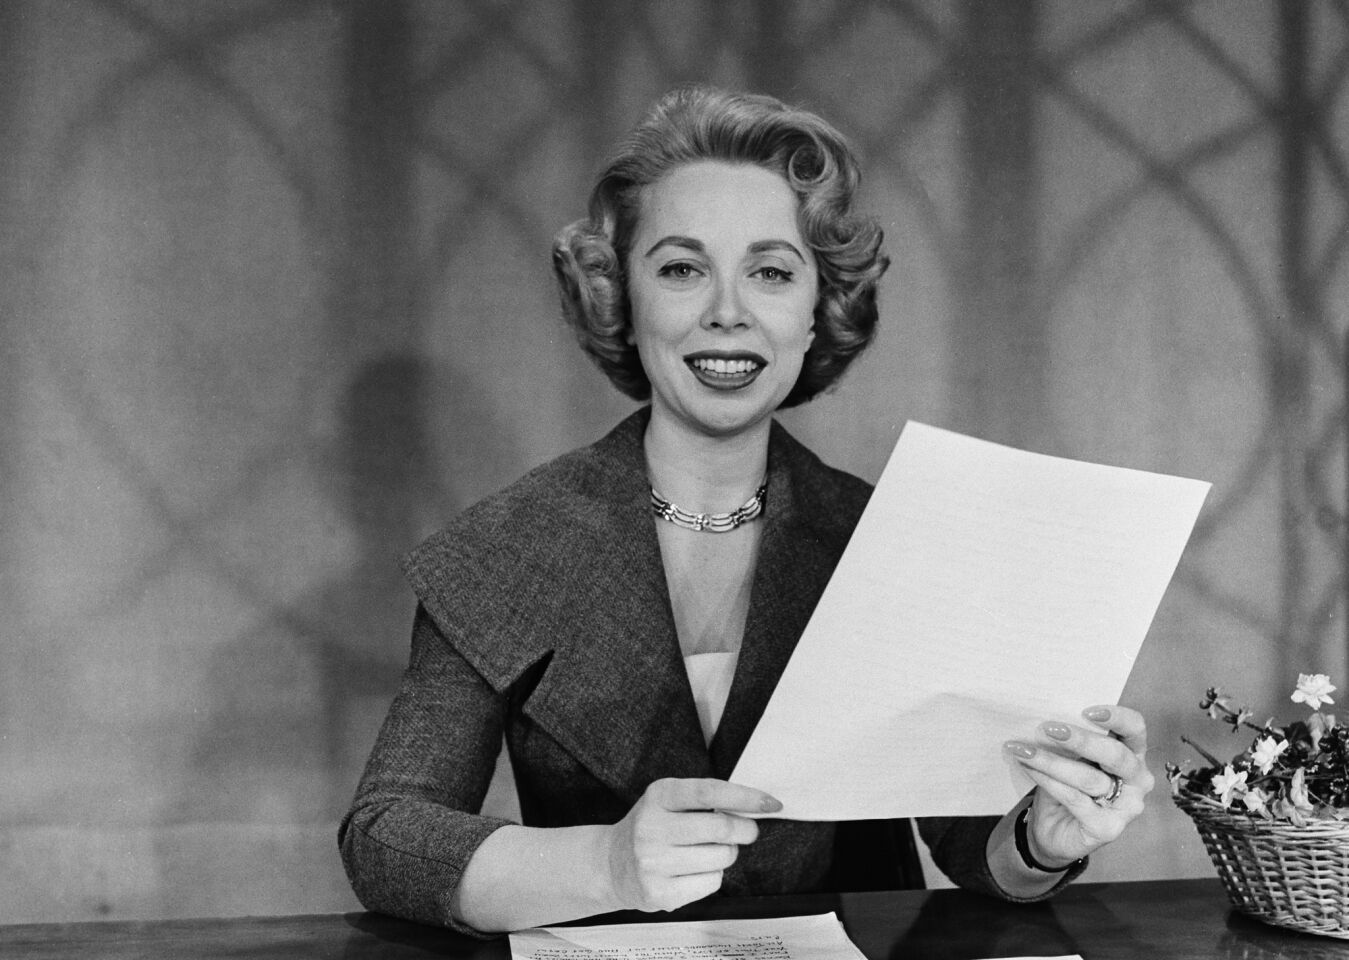 The popular TV psychologist publicly addressed what were then borderline taboo subjects, such as sexual fulfillment and infidelity. By the '70s, she was a fixture of TV, radio, film and print. She was 85. Full obituary Notable deaths of 2012